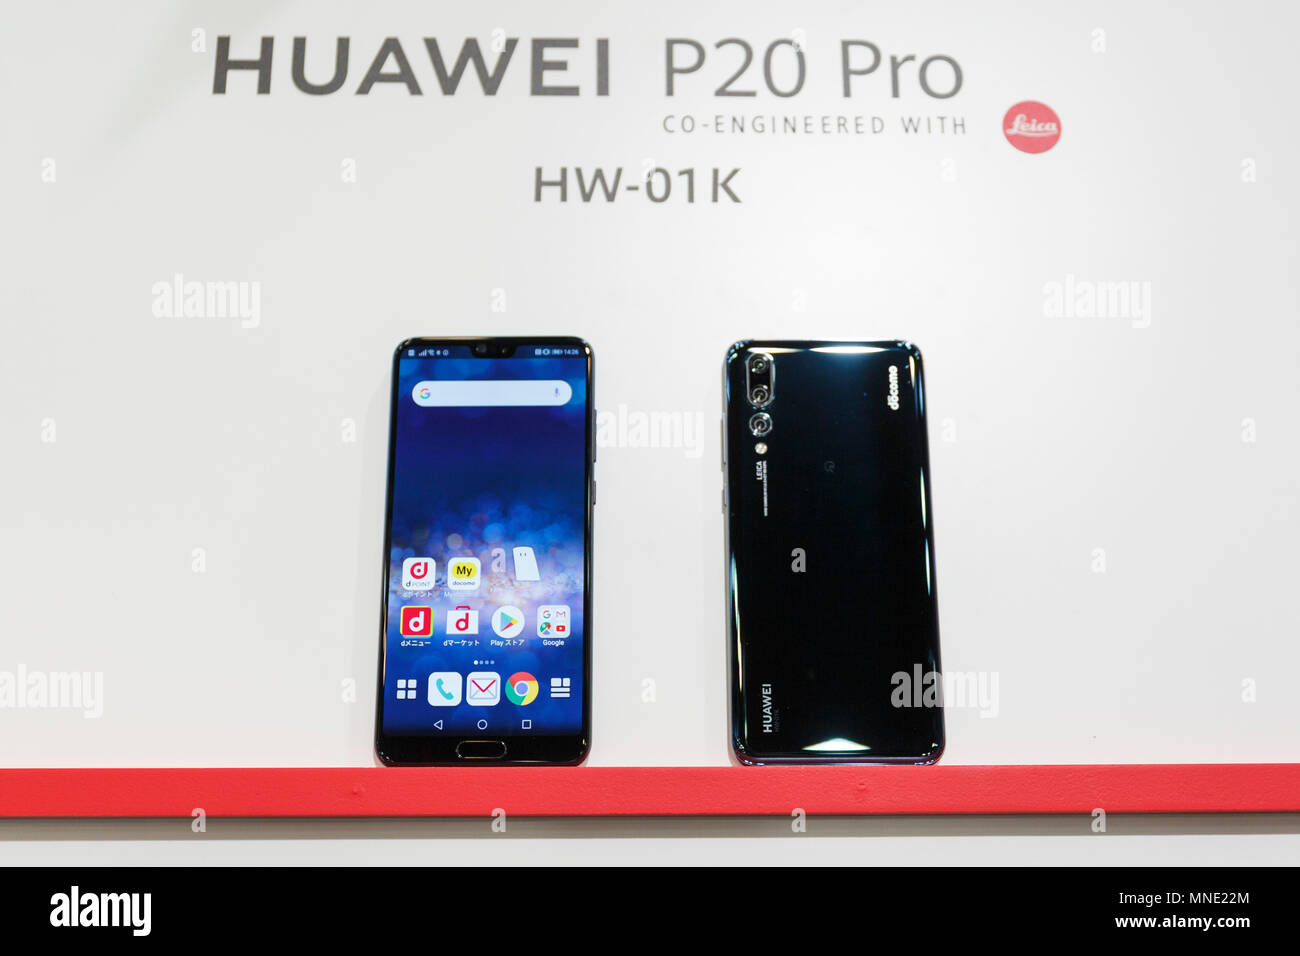 DOMOCO's new smartphone HUAWEI P20 Pro (HW-01K) on display during a news conference for the launch of company's 2018 summer lineup of 11 mobile devices on May 16, 2018, Tokyo, Japan. Kazuhiro Yoshizawa President and CEO presented DOCOMO's new mobile devices for this summer, and its' own Artificial Intelligence (AI) personal assistant ''my daiz'' which will be available from May 30. DOCOMO also launched a new financial advice service ''THEO '' available from May 16th. Credit: Rodrigo Reyes Marin/AFLO/Alamy Live News Stock Photo